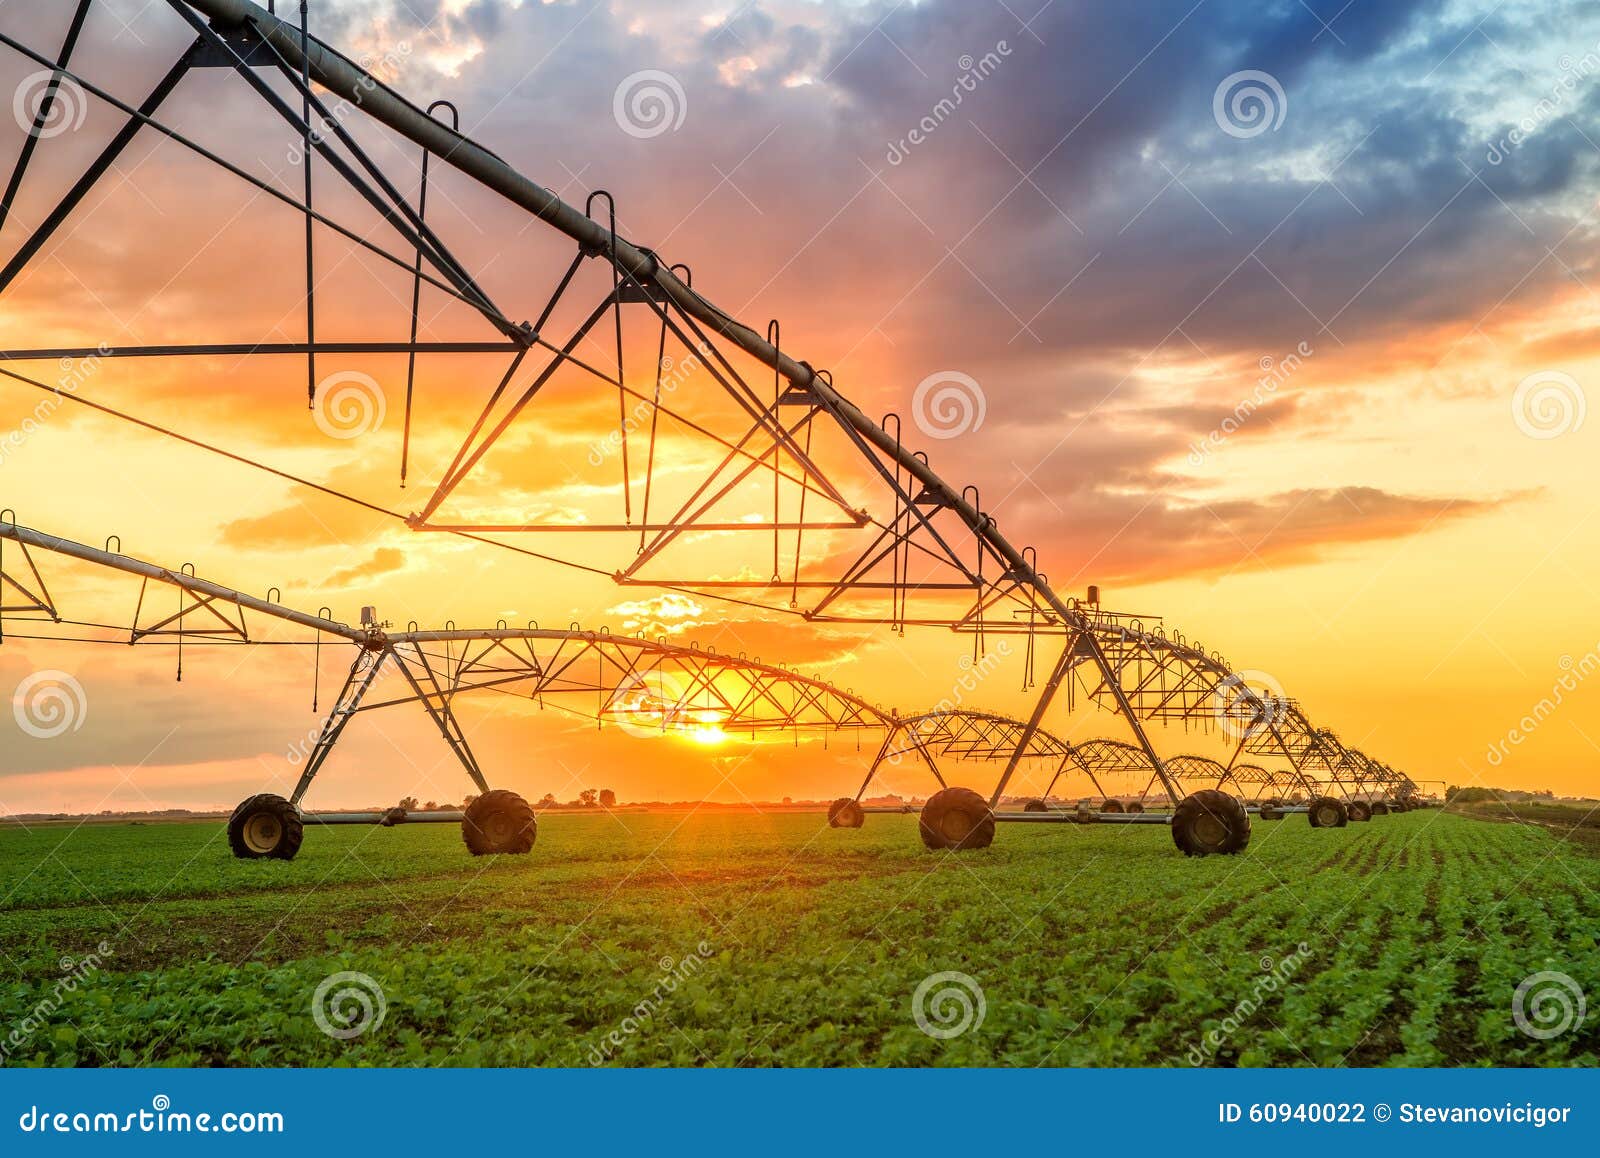 automated farming irrigation system in sunset